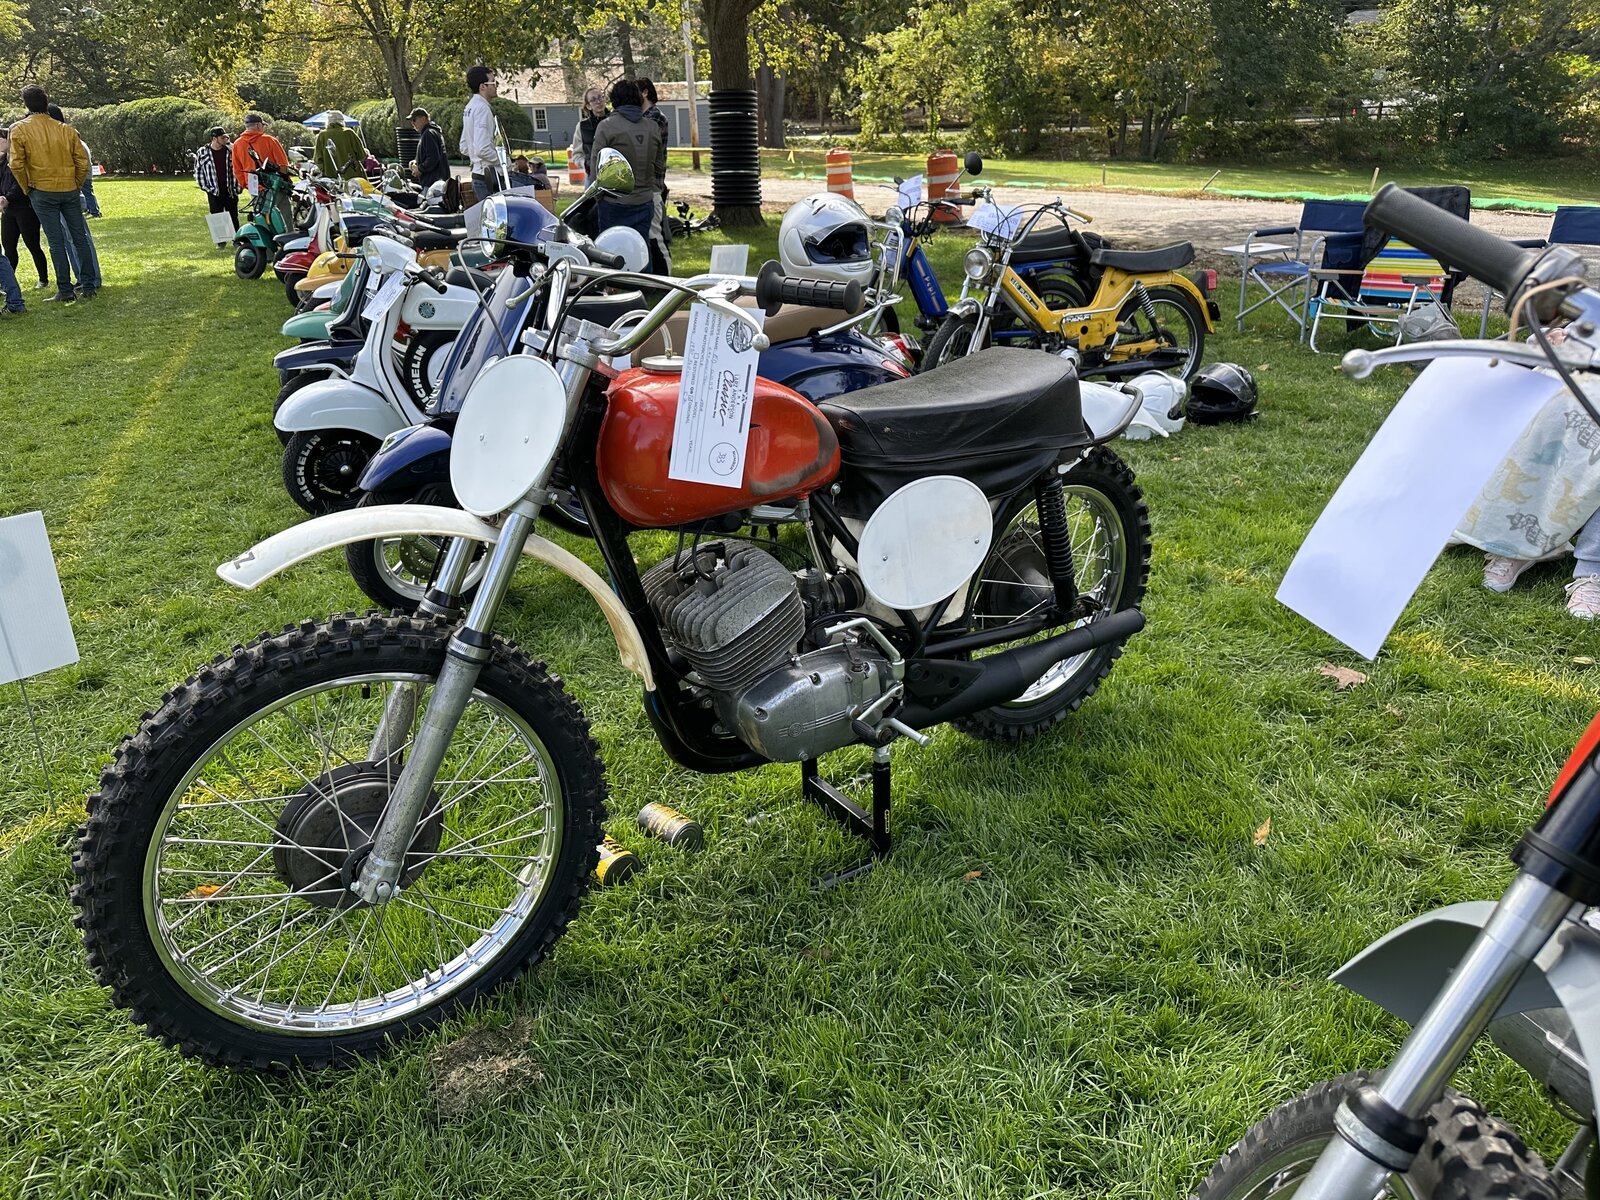 Larz Anderson Museum Eropean Motorcycle Day Boston,MA 9-7-14 and 10-14-23